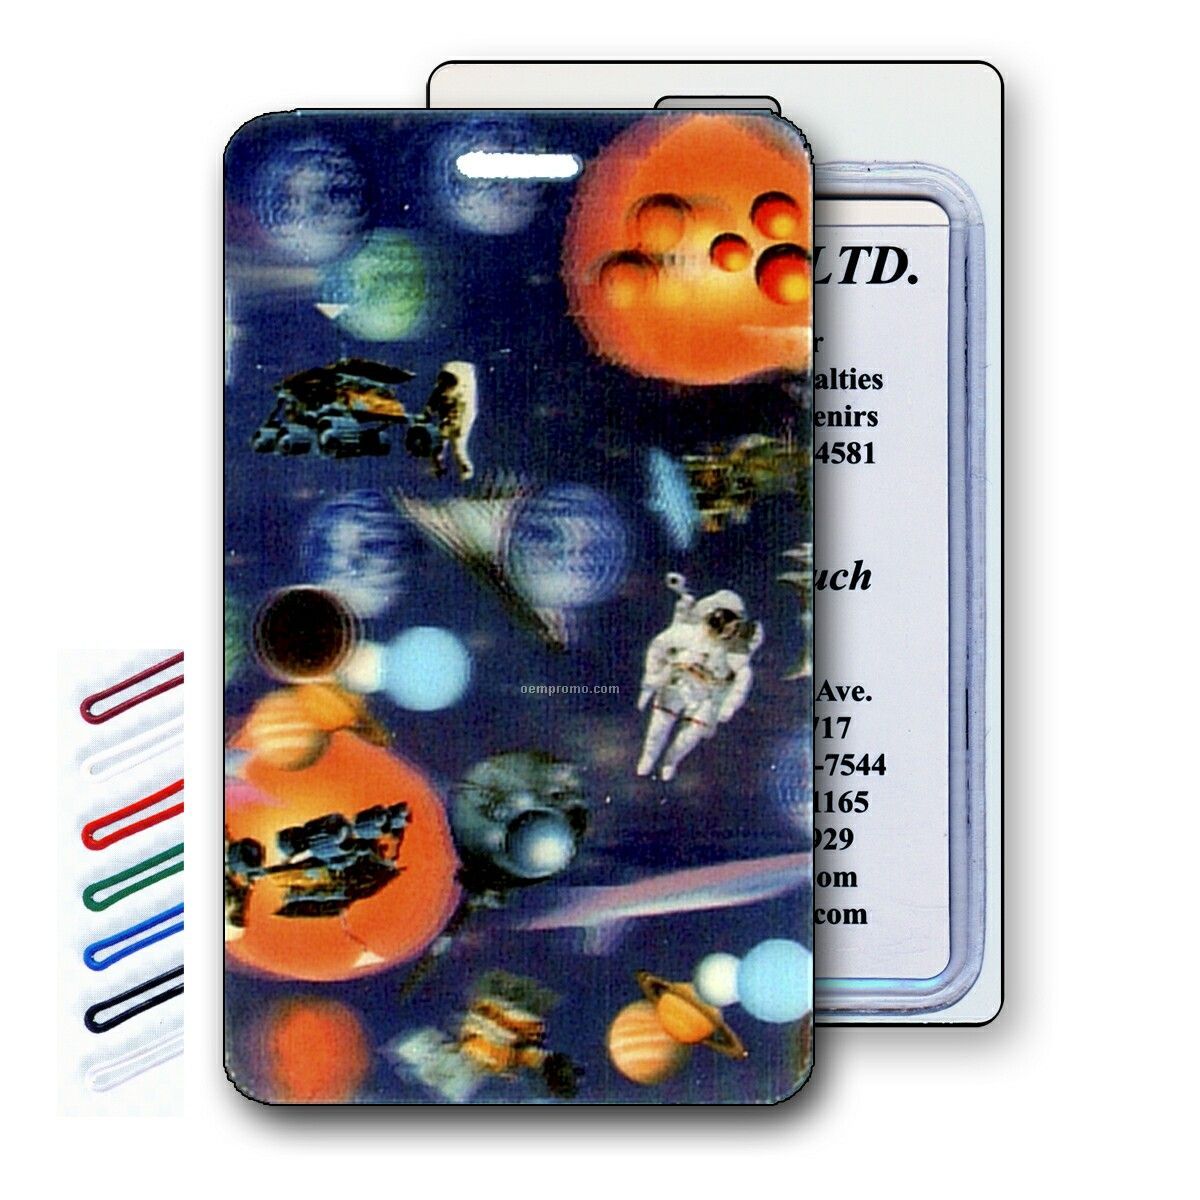 Lenticular Luggage Tags 3-d Images (Space, Universe, Astronauts)